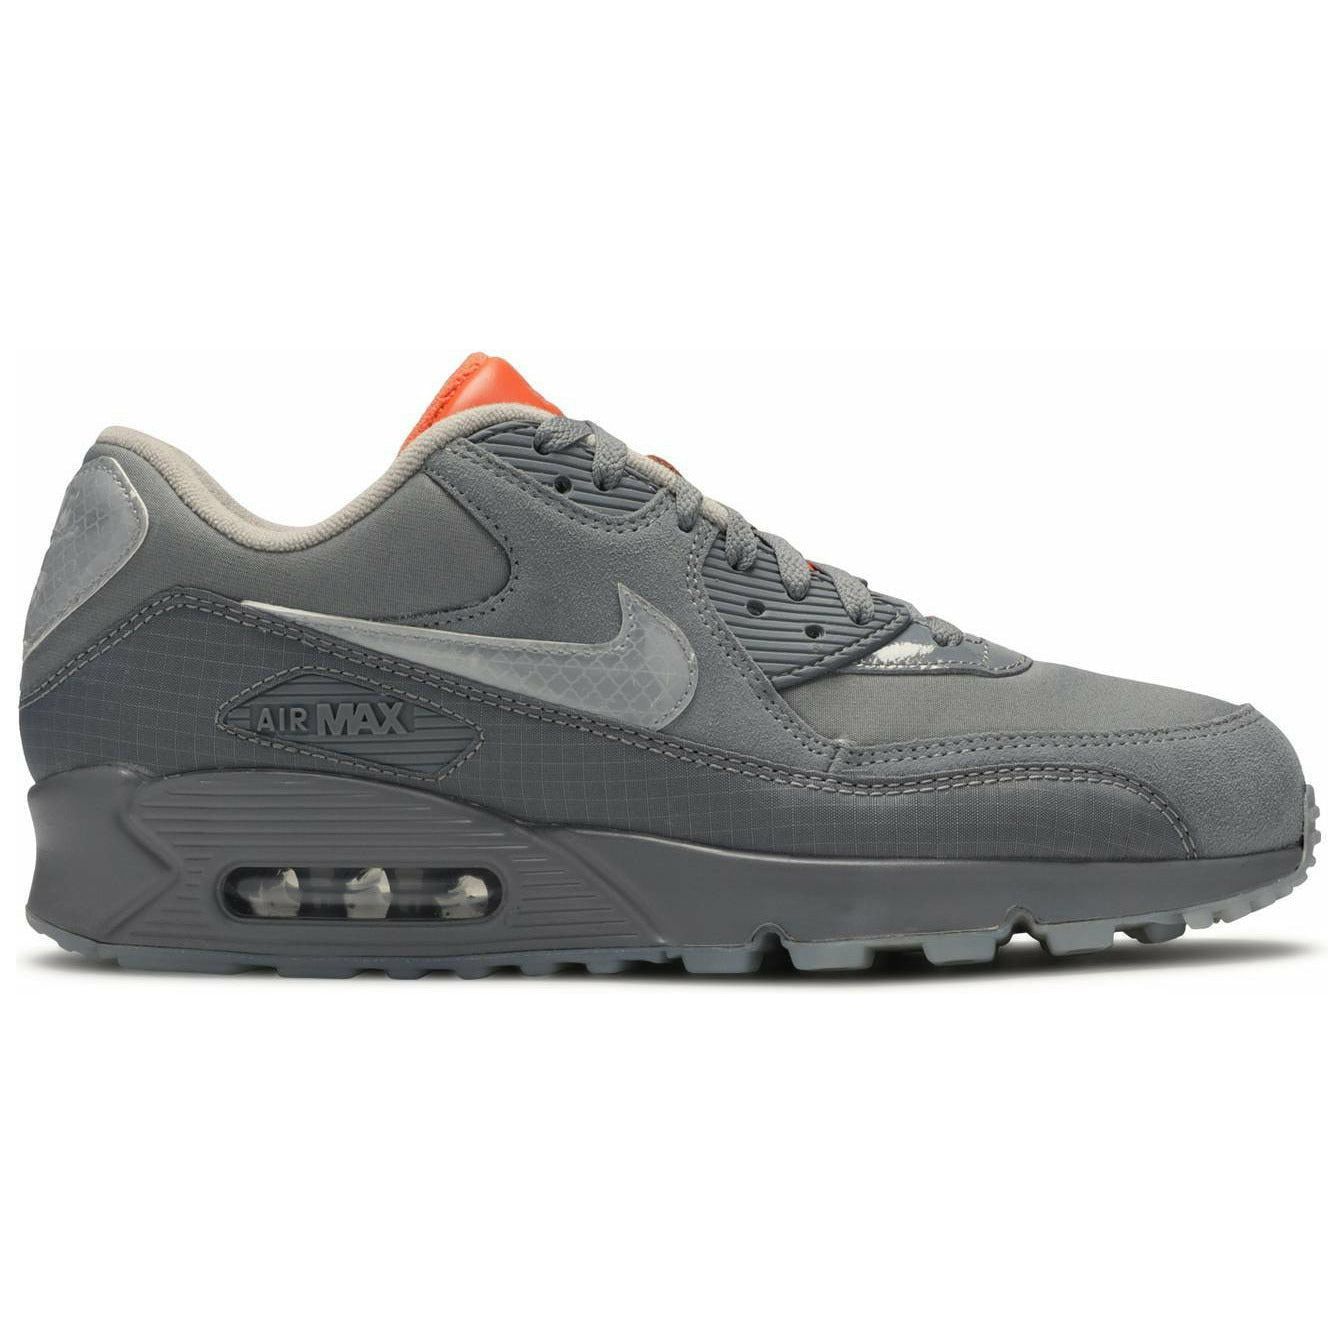 Nike Air Max 90 The Basement Glasgow by Nike from £225.00